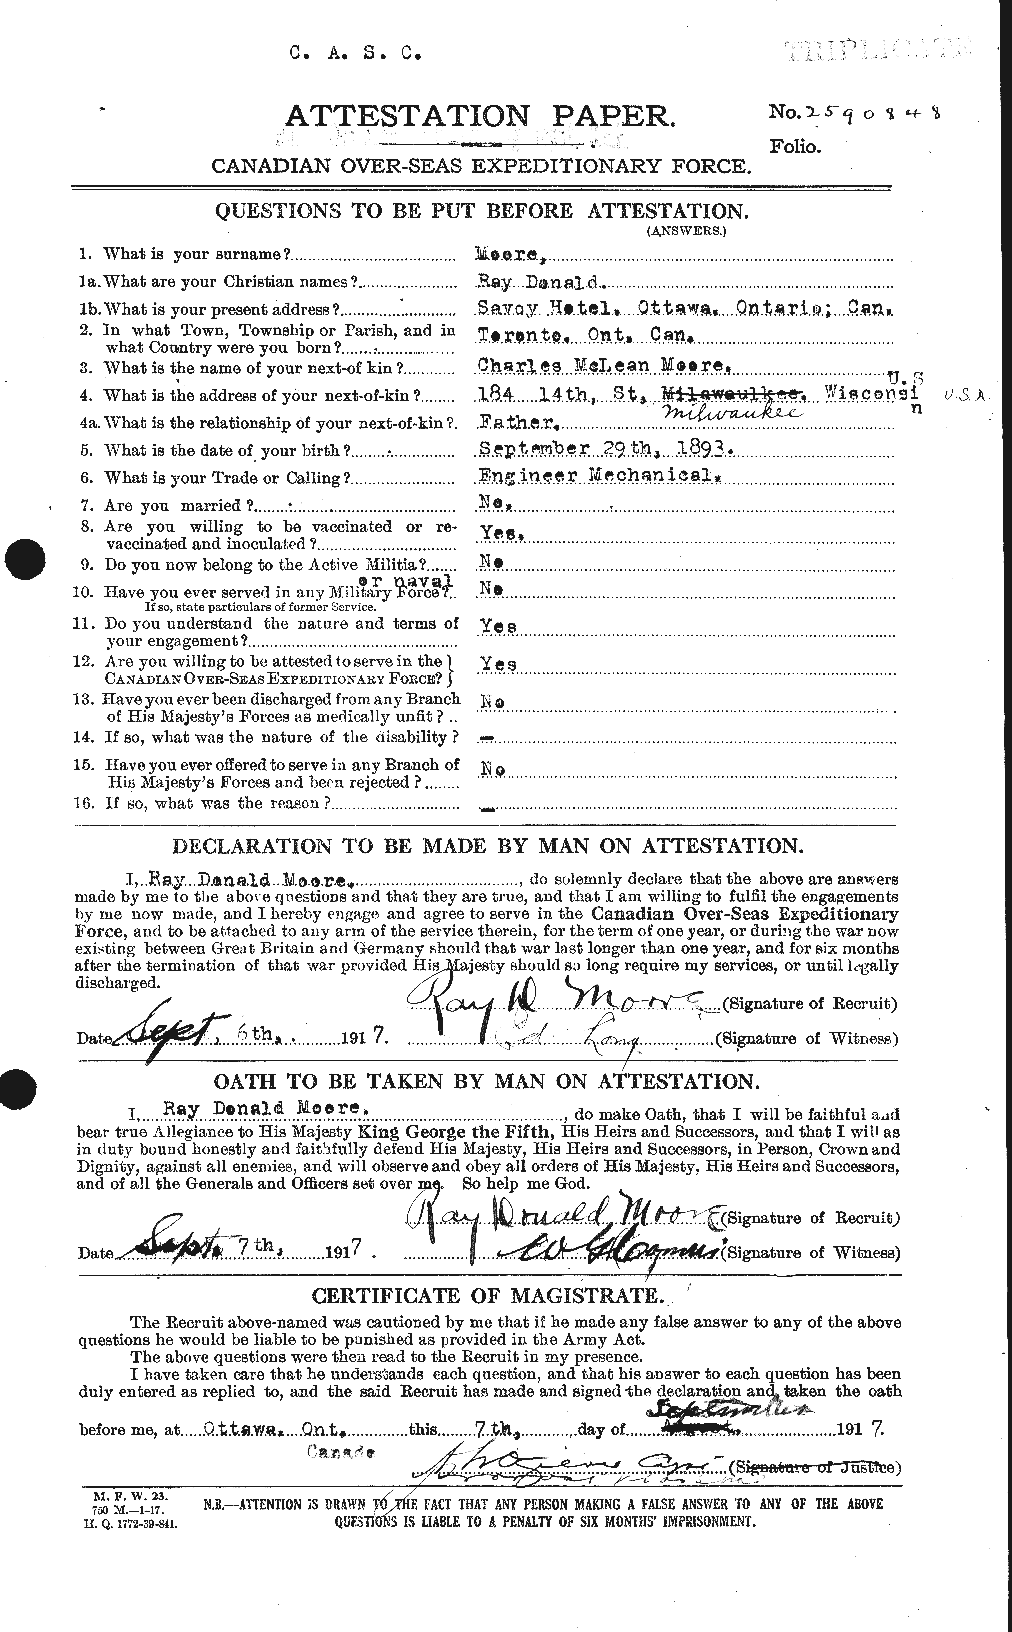 Personnel Records of the First World War - CEF 503516a